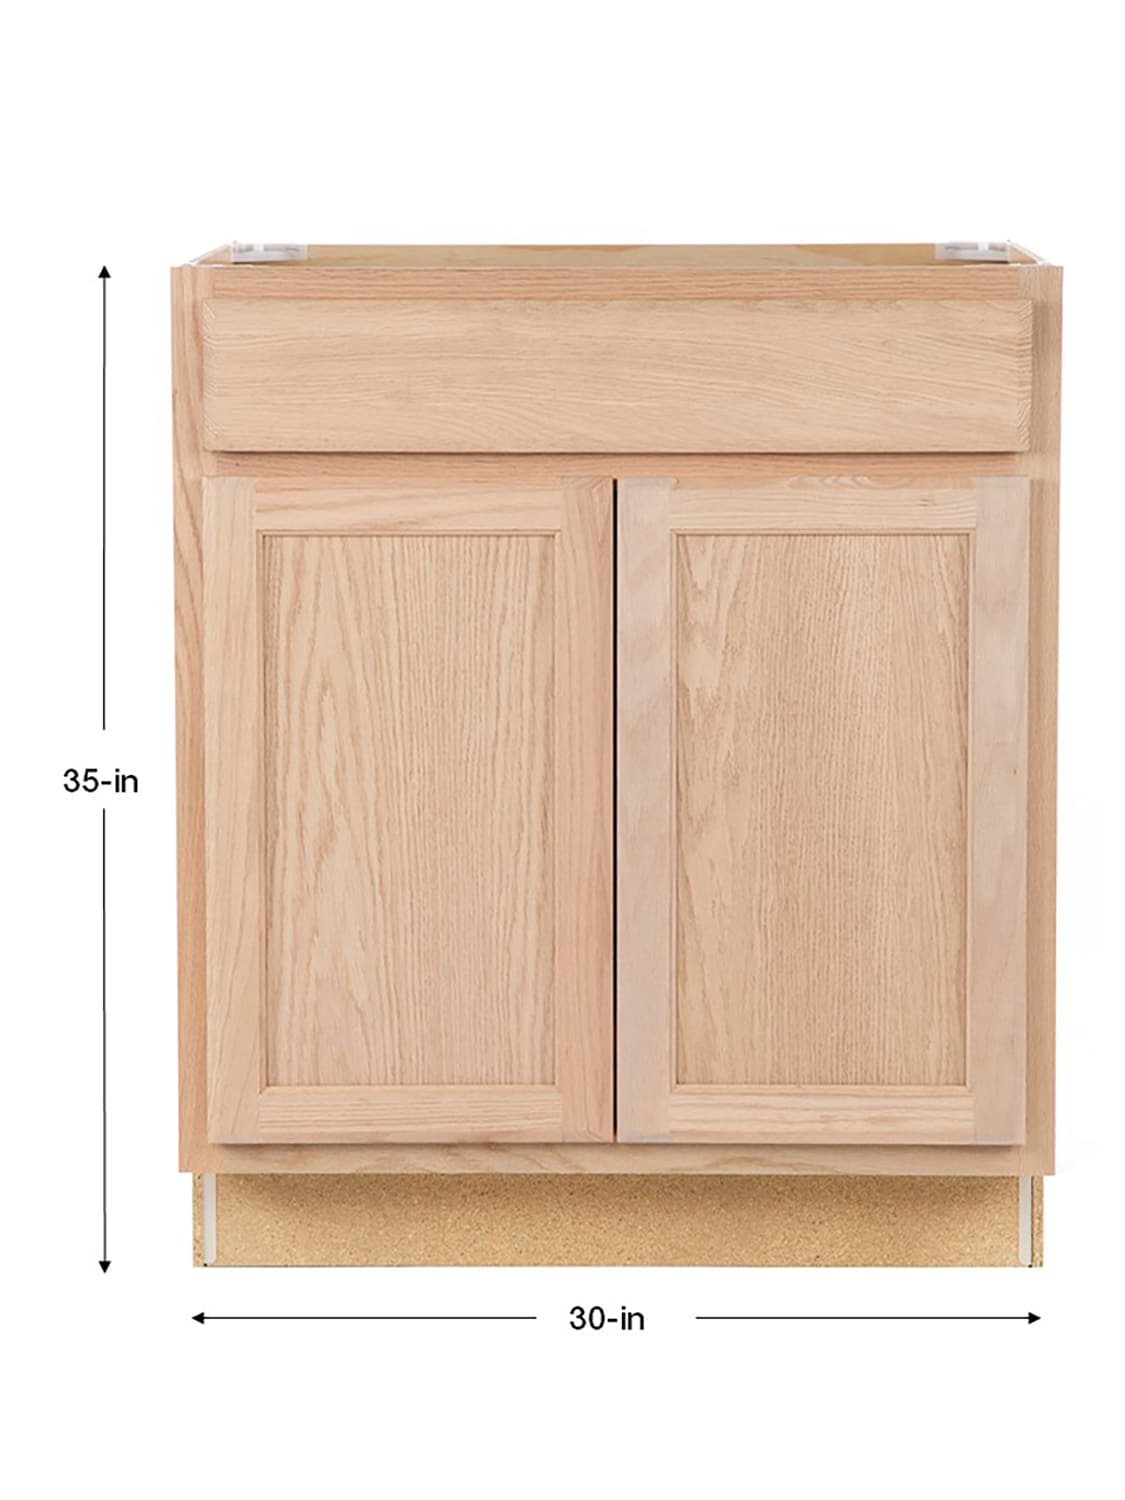 Project Source Unfinished 30 In Natural Rustic Oak Bathroom Vanity Cabinet The Vanities Without Tops Department At Com - 30 Inch Unfinished Bathroom Vanity Base Cabinet With Drawers